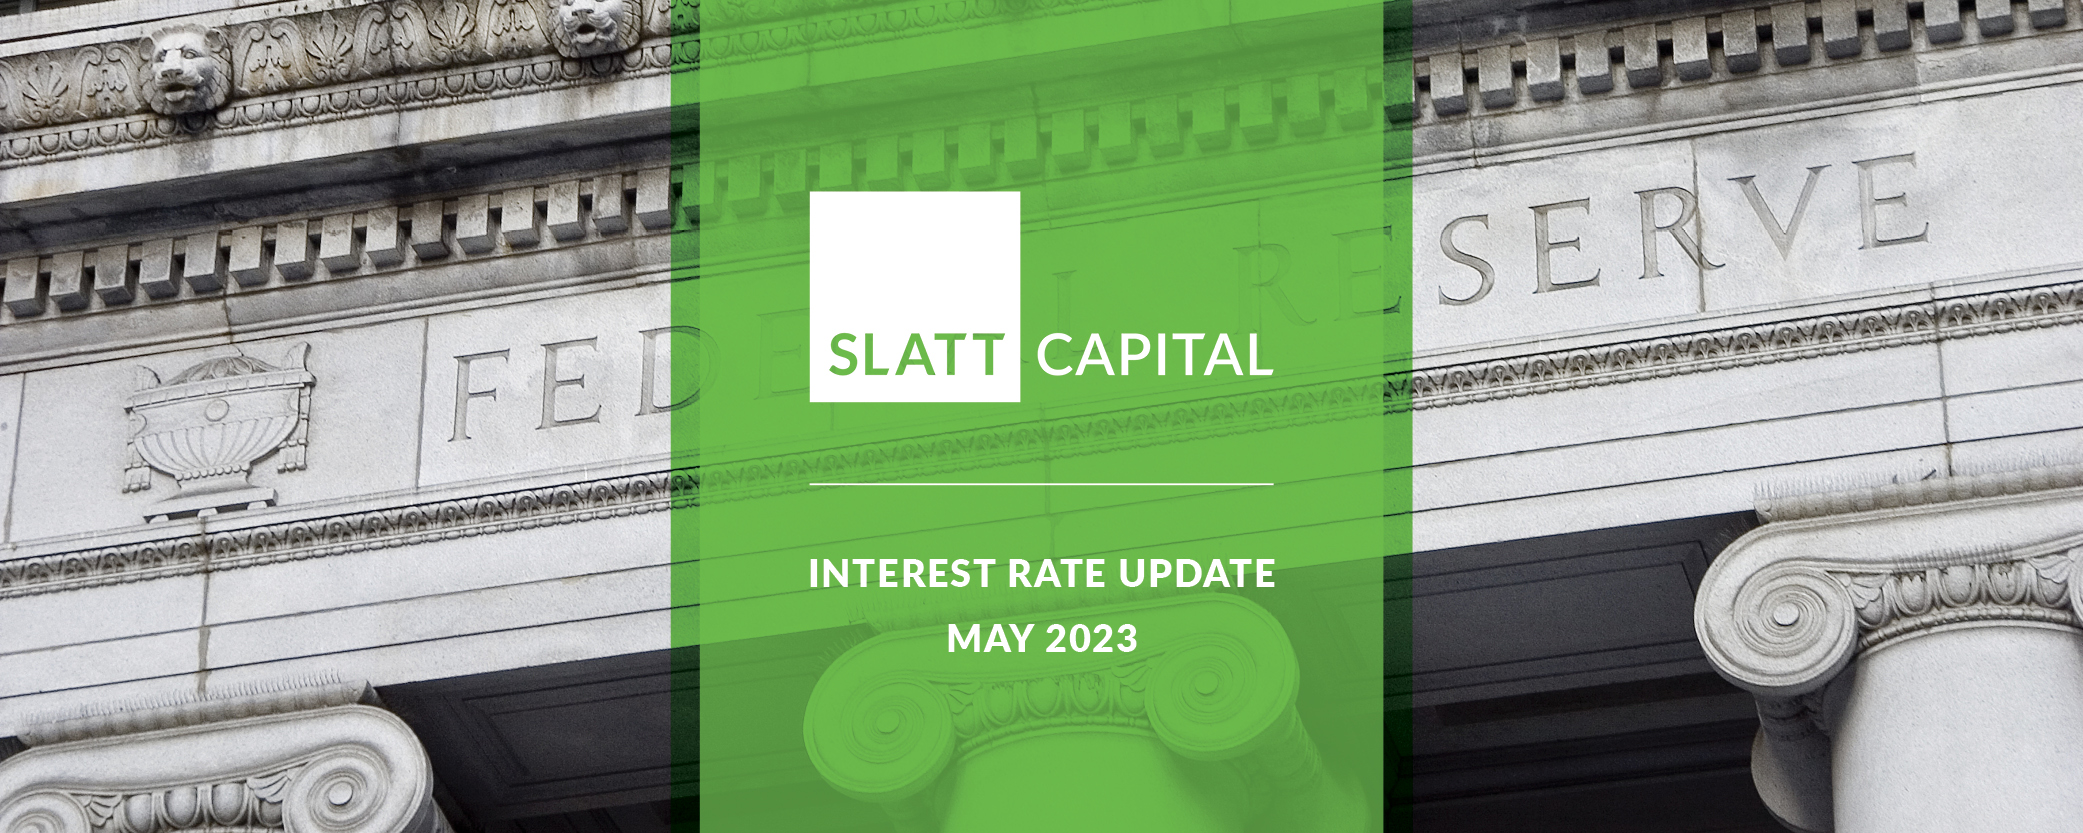 Interest rate update may 2023